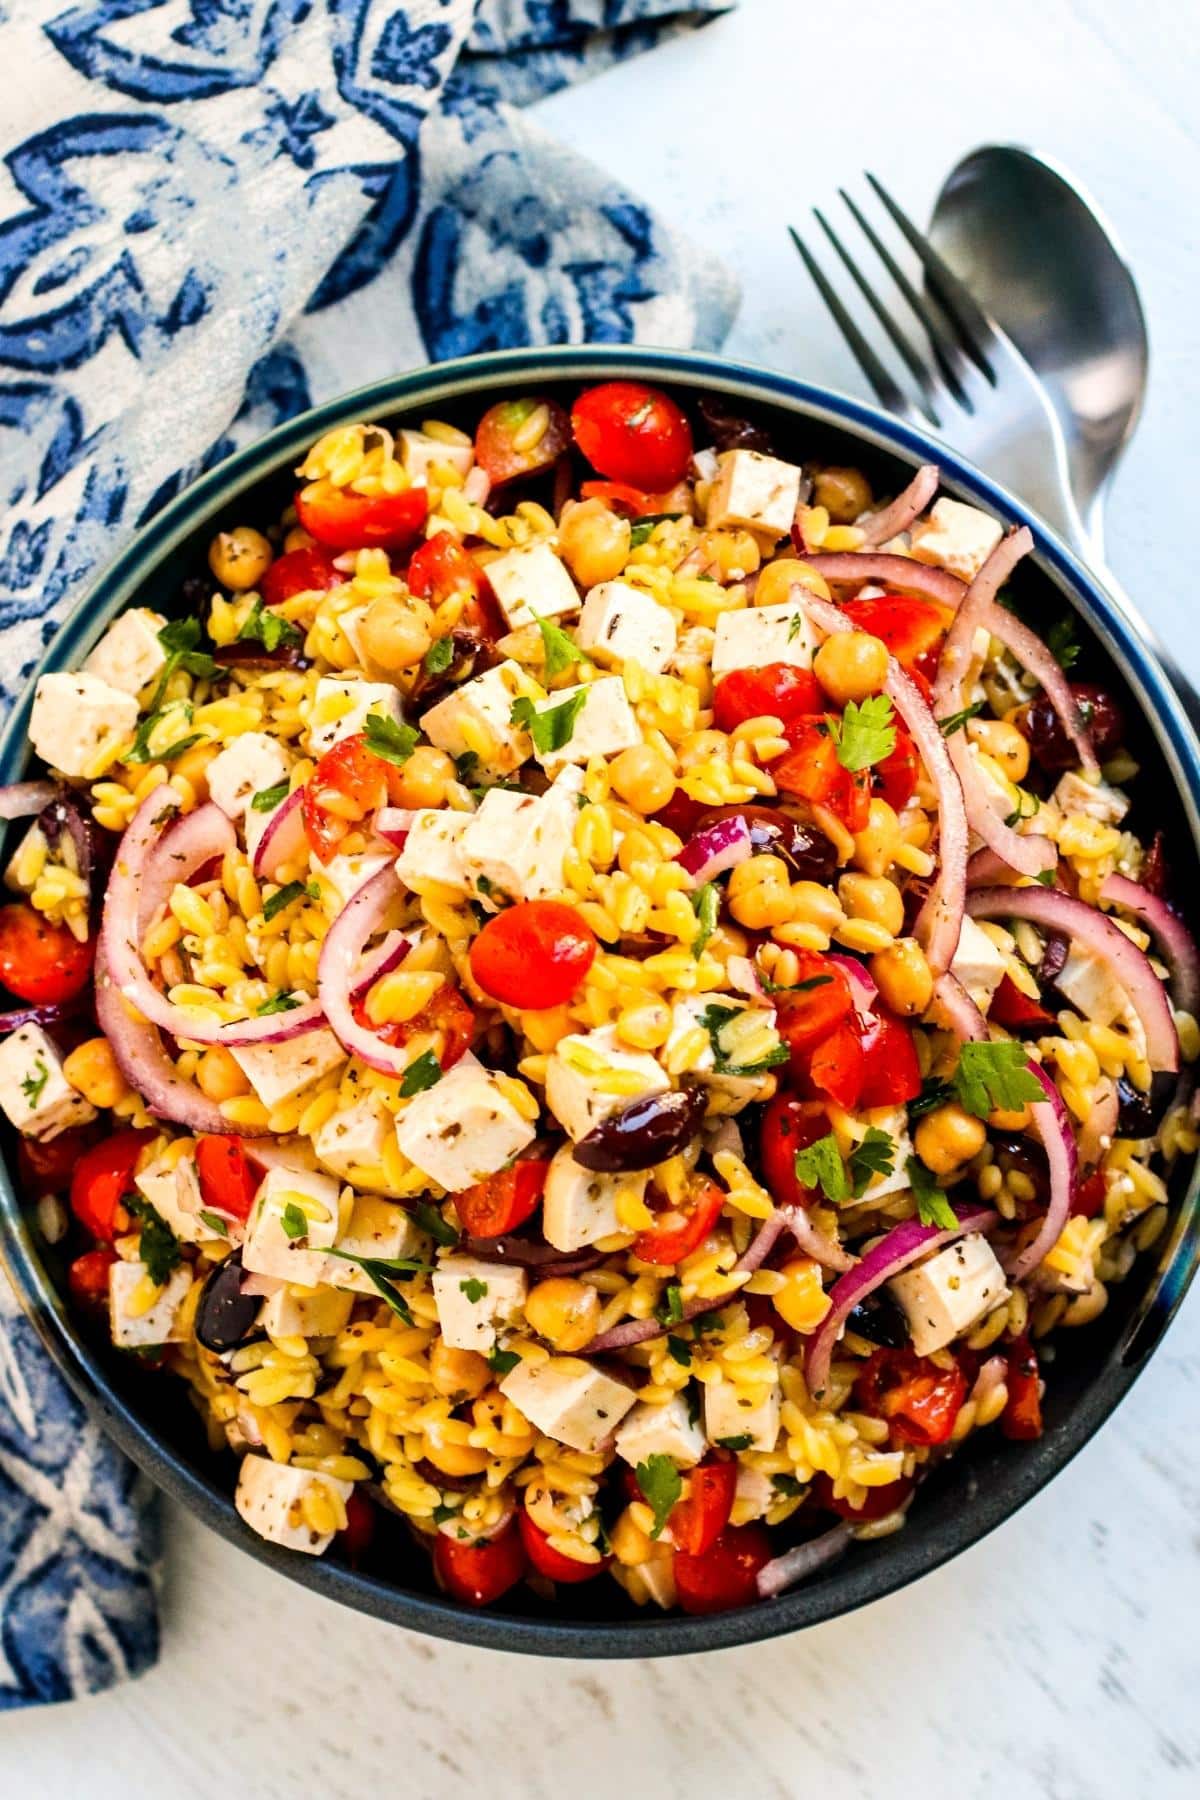 Bowl of Mediterranean Vegan Orzo Salad next to serving utensils and blue and white napkin.